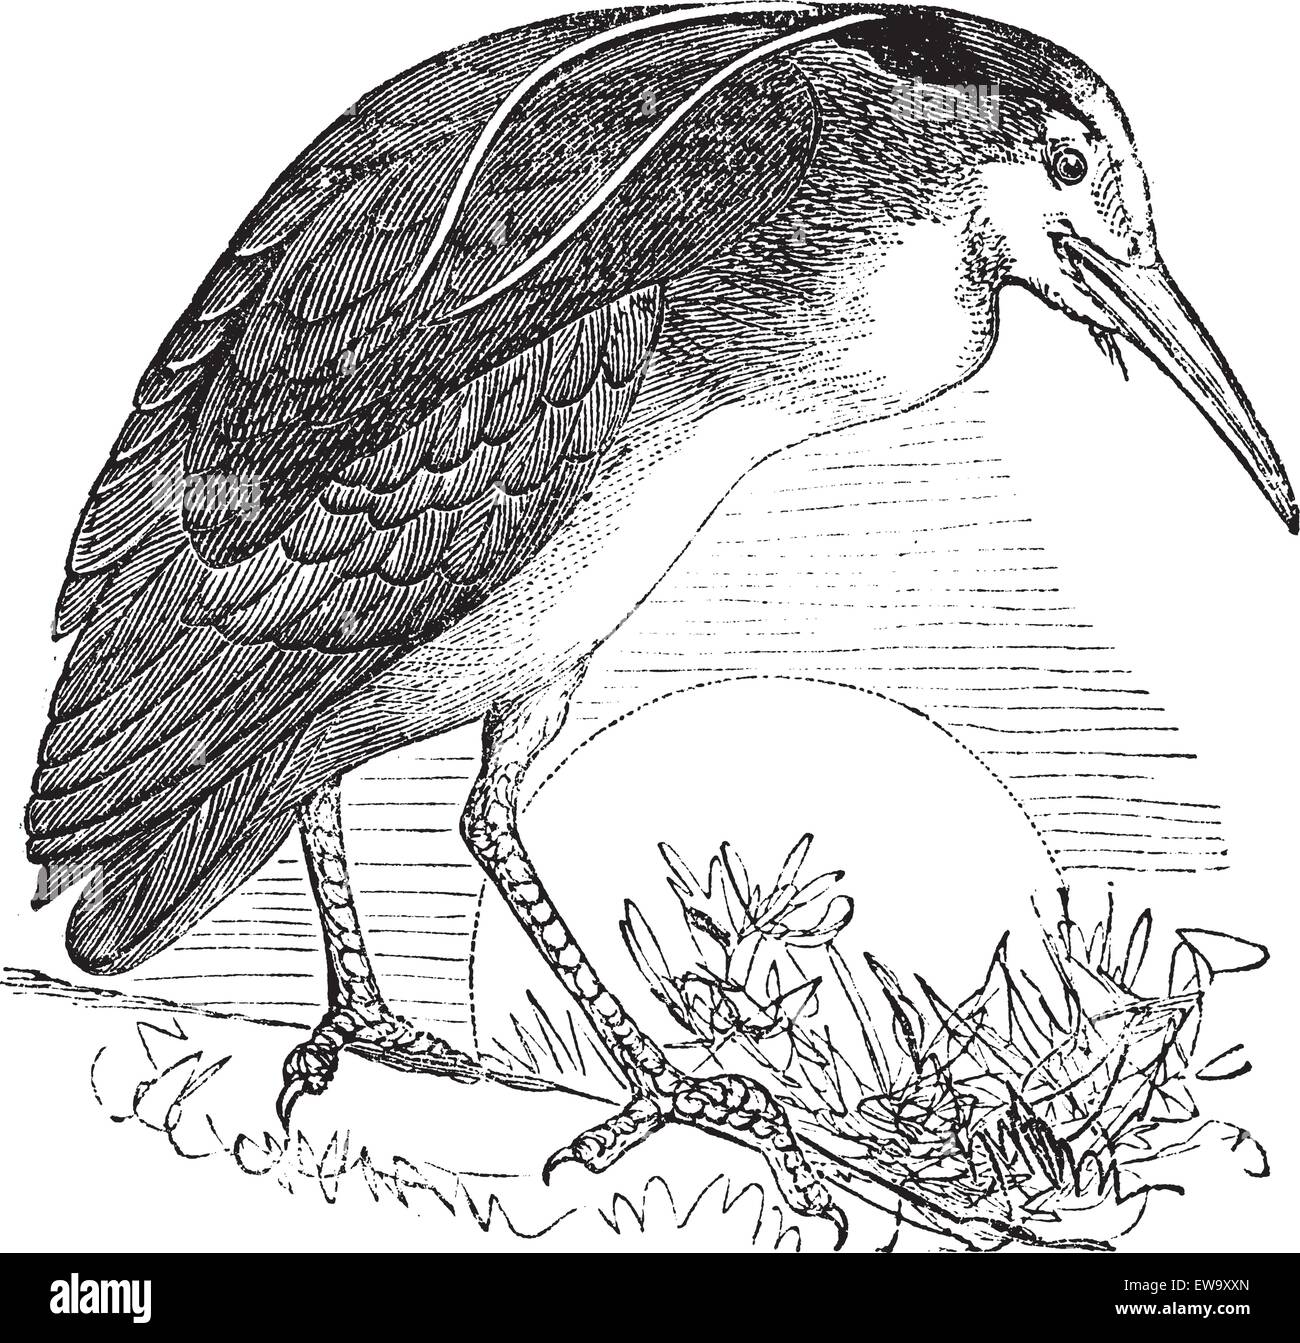 Night Heron also known as Nycticorax nycticorax, Bird, North America, vintage engraved illustration of Night Heron, North America. Stock Vector